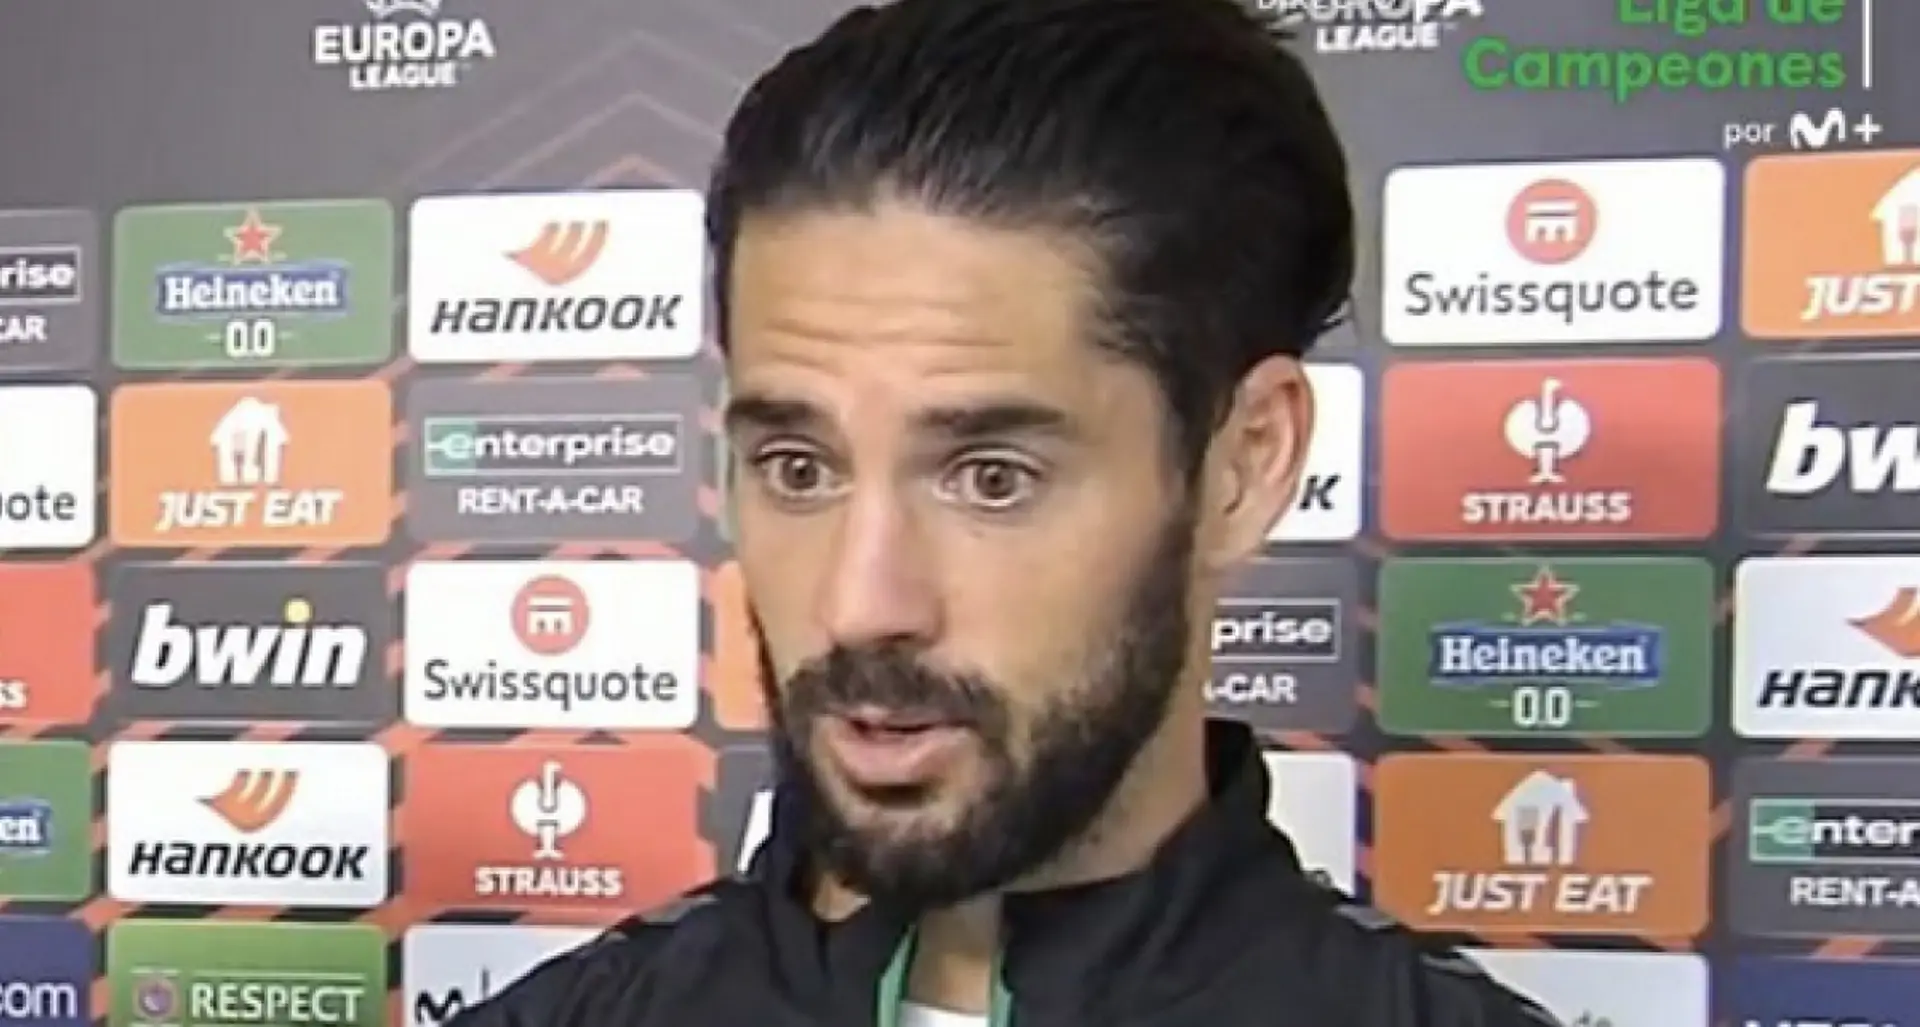 'They didn't let me play. I should've left earlier': Isco breaks silence on final years with Real Madrid